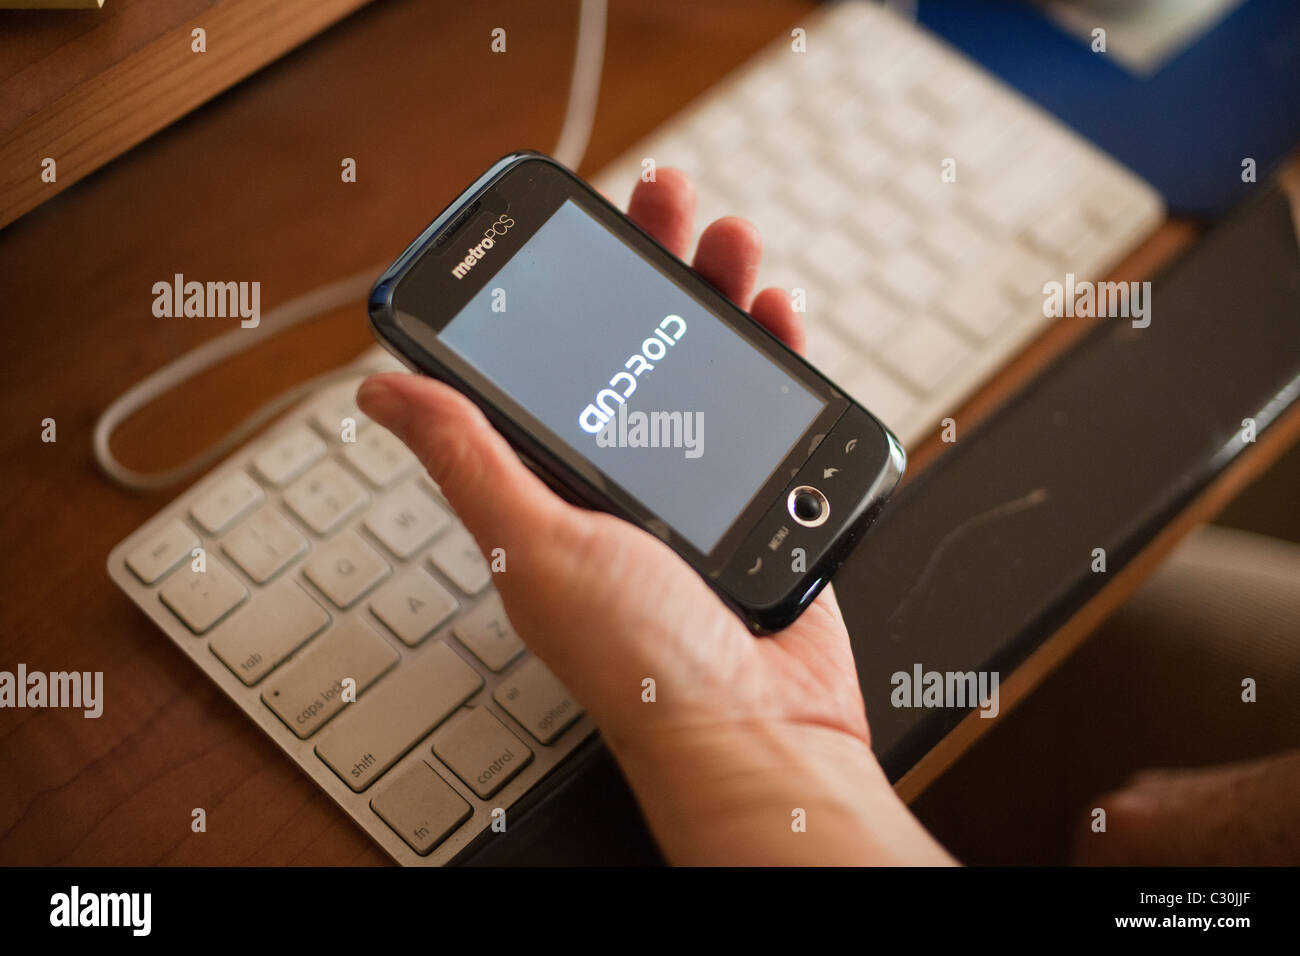 A woman uses her Android operating system powered smart phone on Wednesday, April 20, 2011. (© Richard B. Levine) Stock Photo